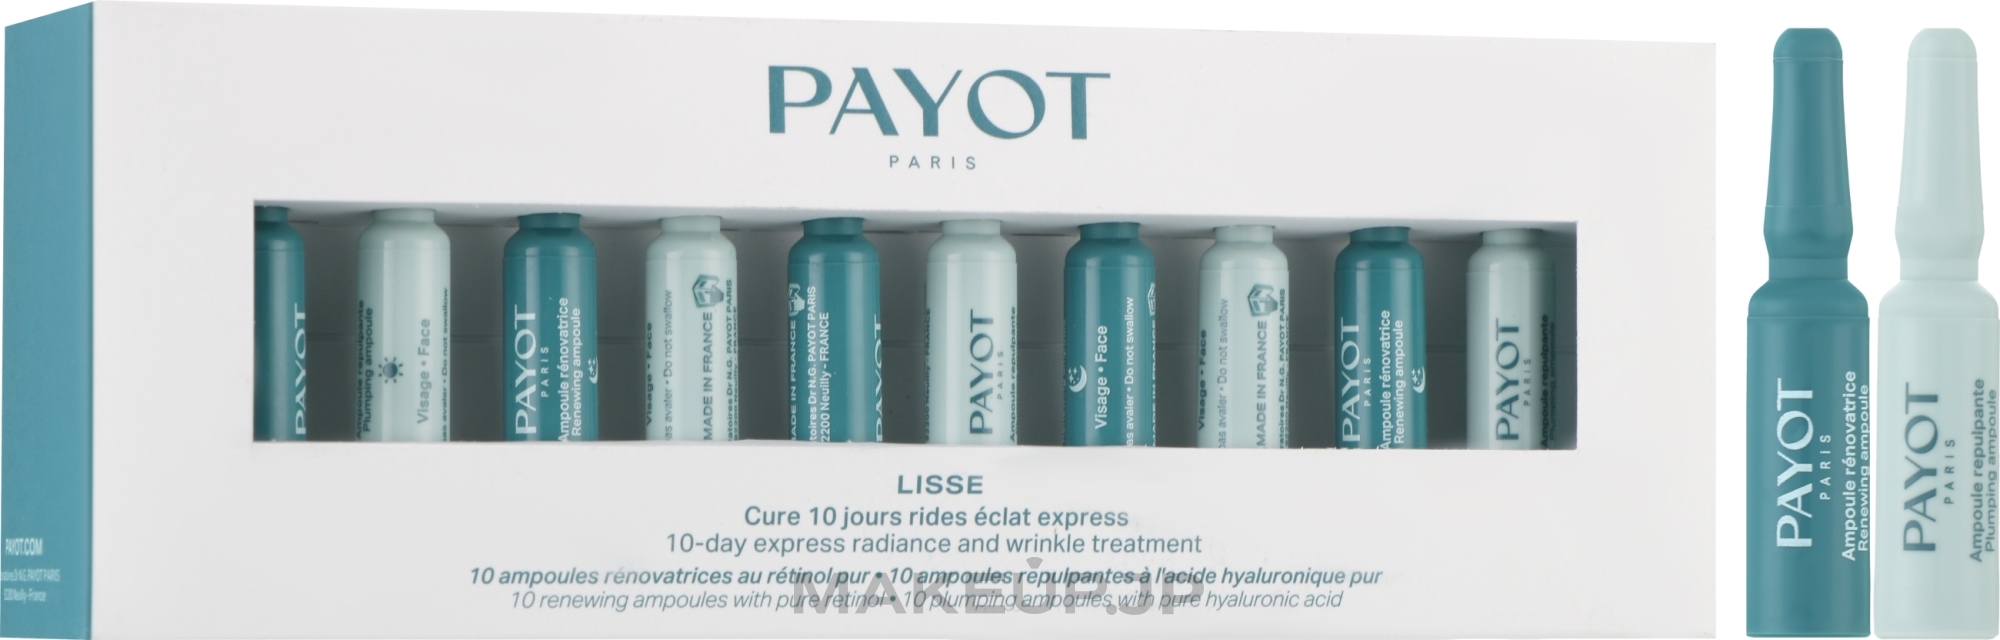 10-Day Express Care for Glowing Skin without Wrinkles - Payot Lisse 10-Day Express Radiance and Wrinkles Treatment — photo 20 x 1 ml